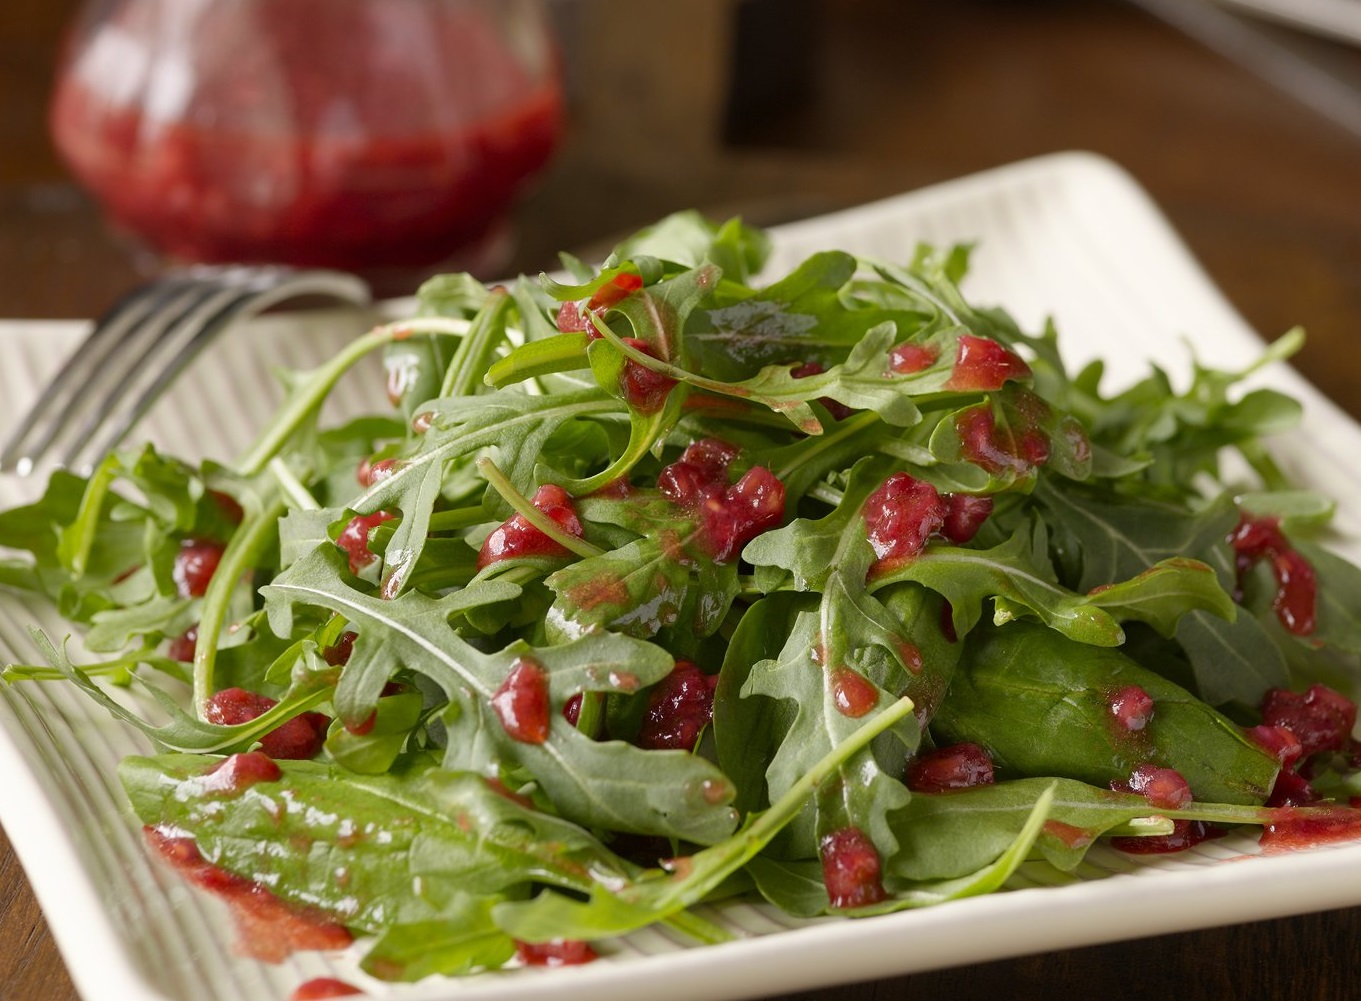 Arugula and Spinach Salad with Raspberry Dressing - CIA Foodies